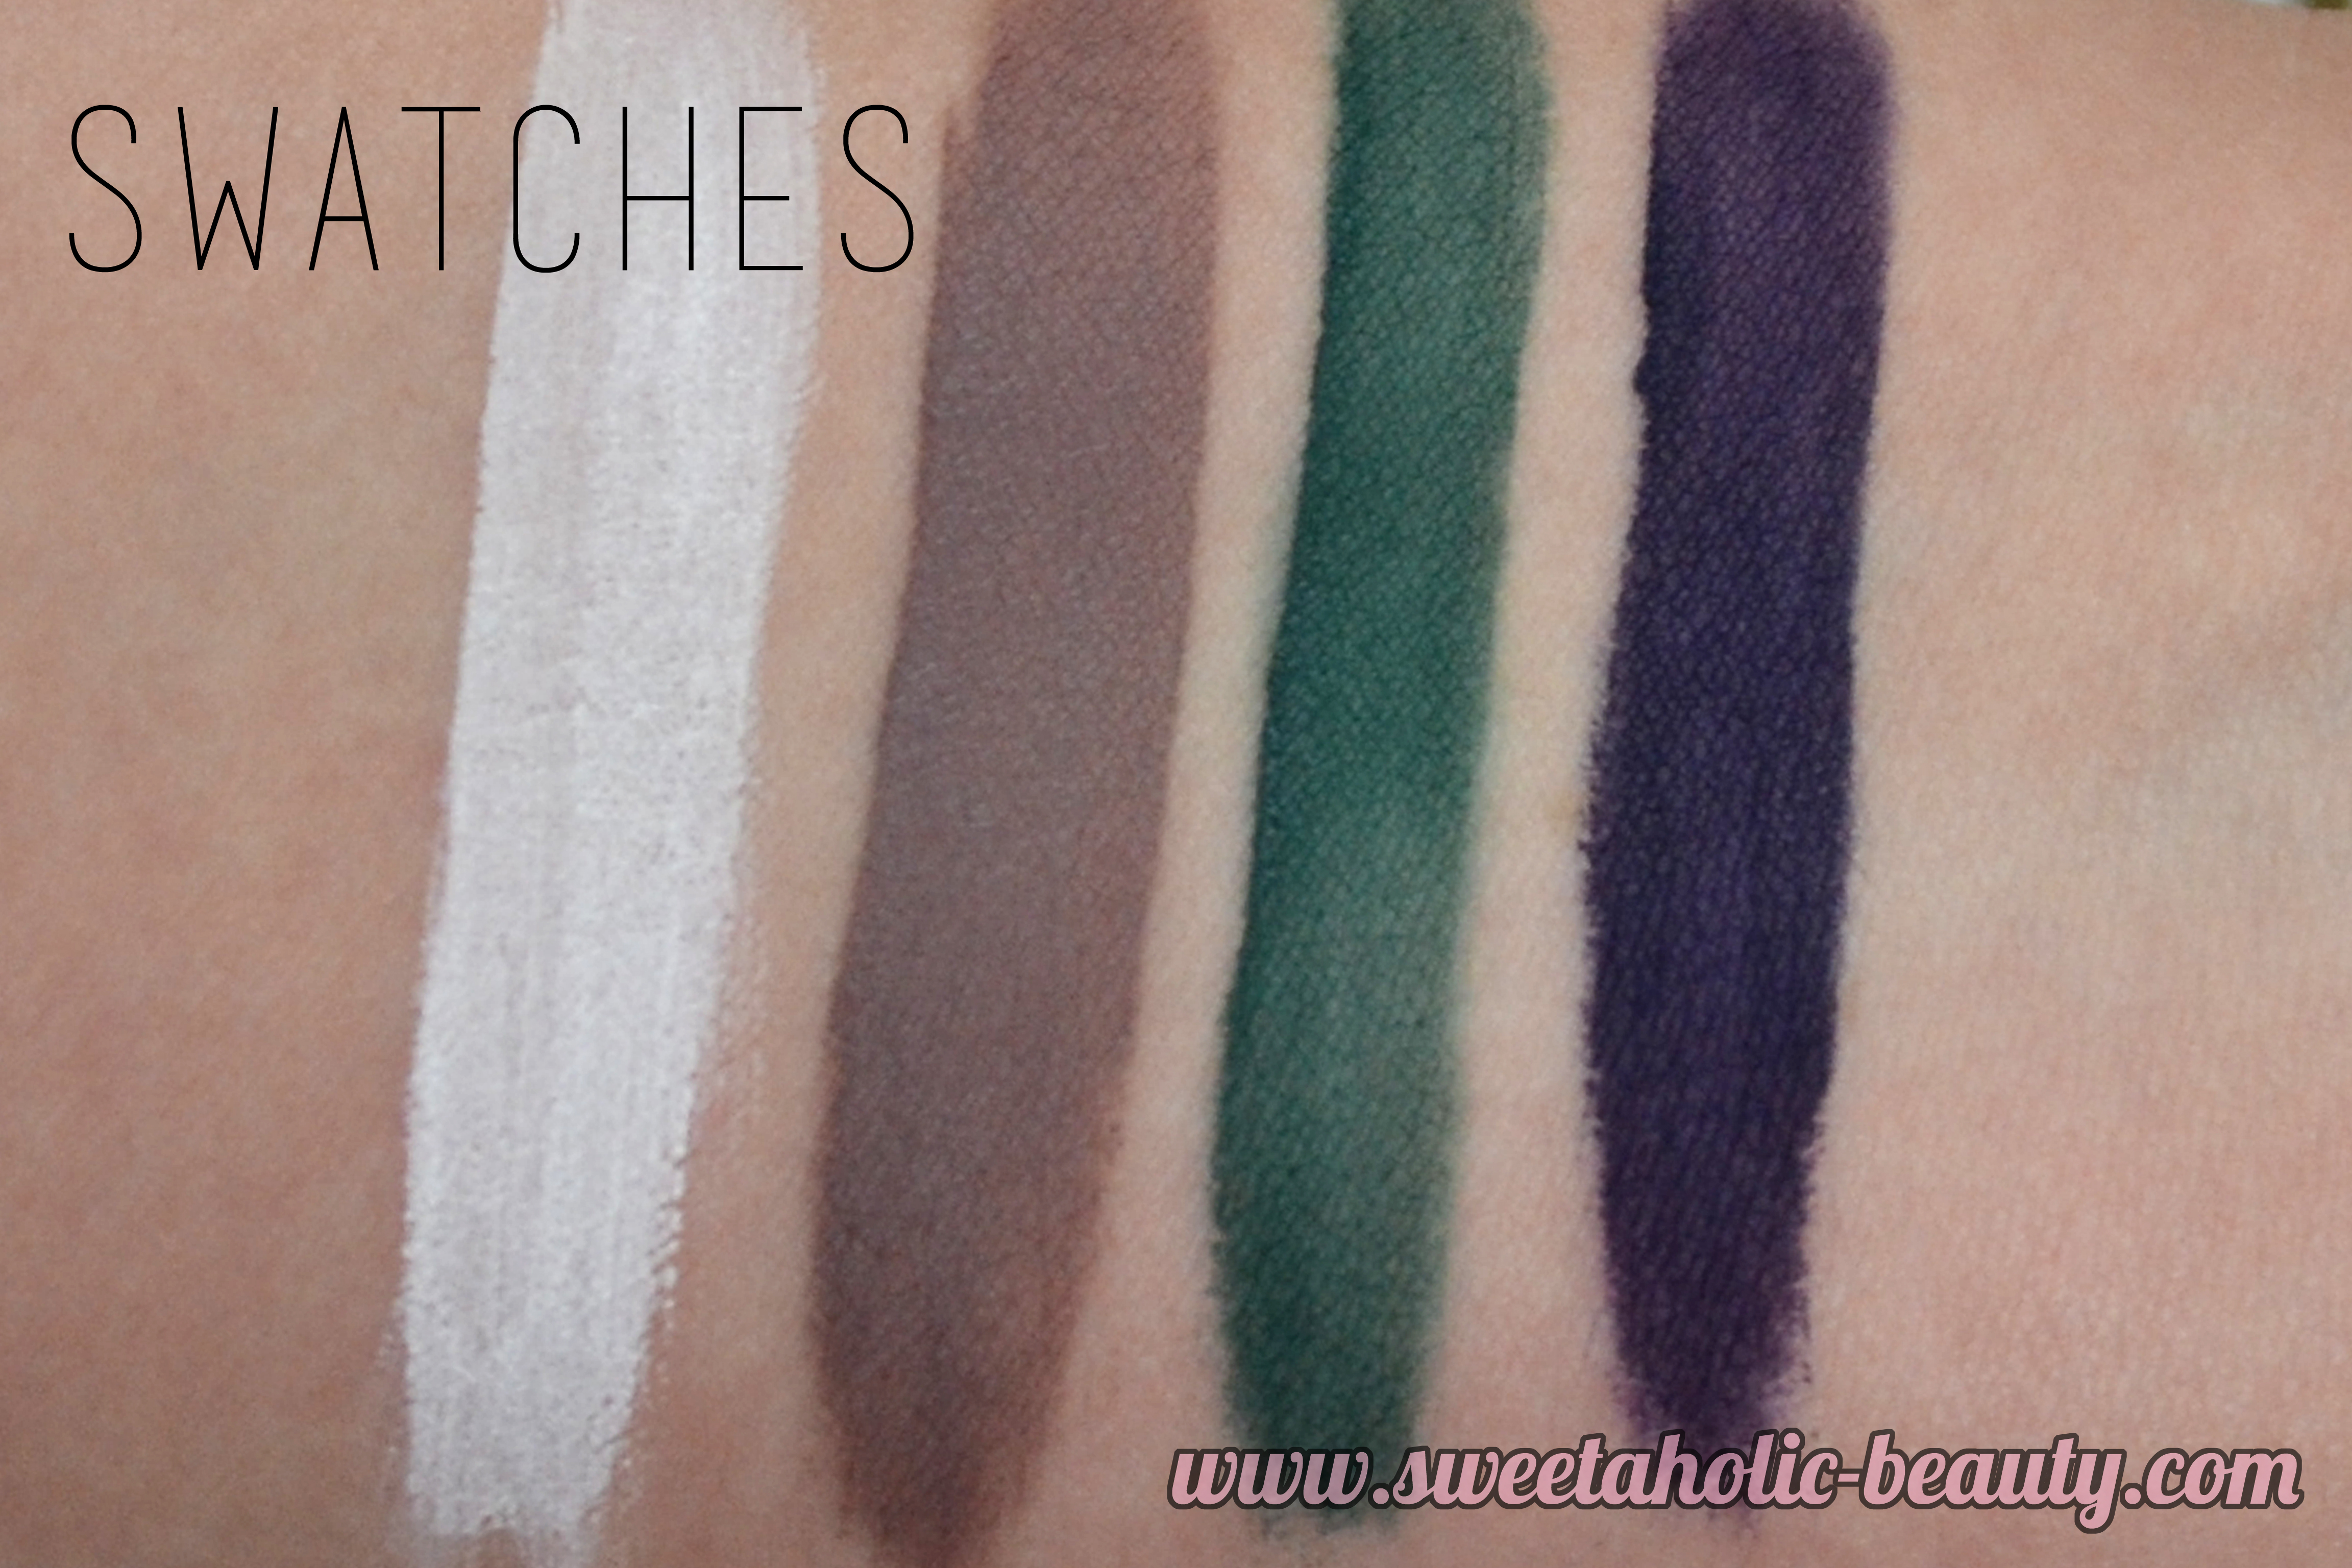 Australis Cosmetics AC Gems Limited Edition Velourlips Collection Review & Swatches - Sweetaholic Beauty